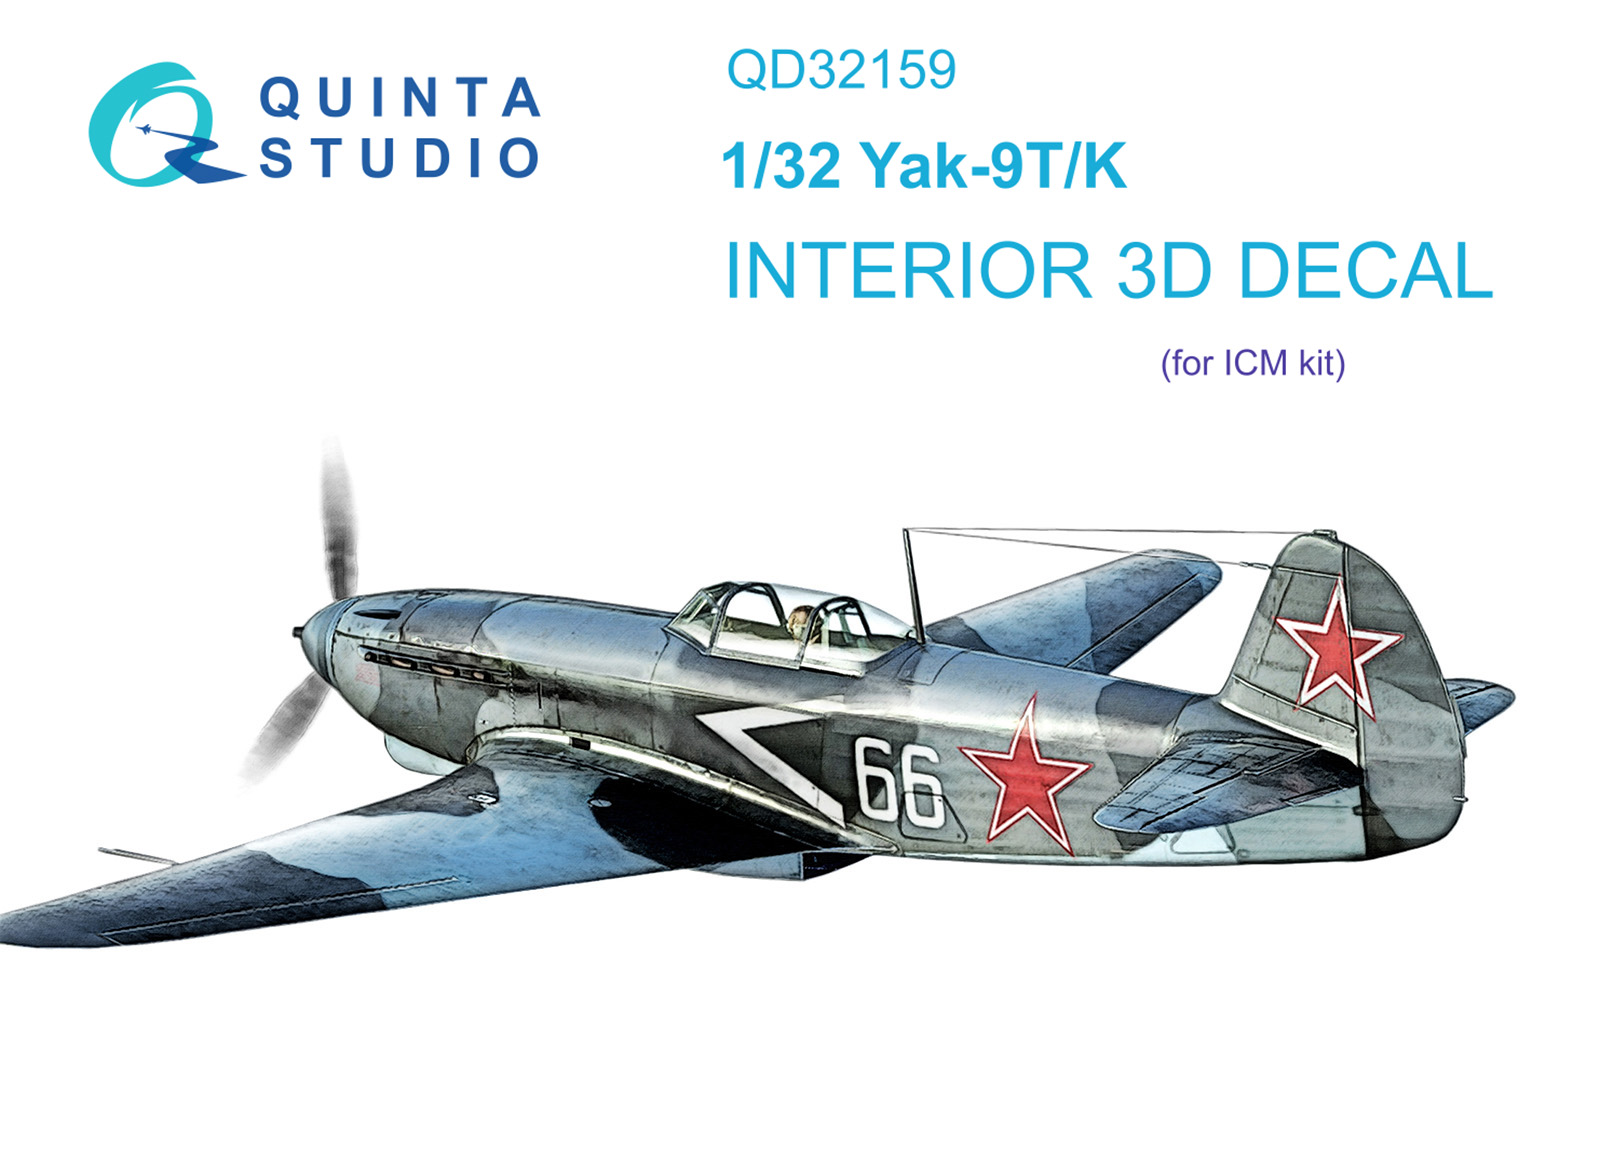 Yak-3 3D-Printed & coloured Interior on decal paper (for Special Hobby kit)